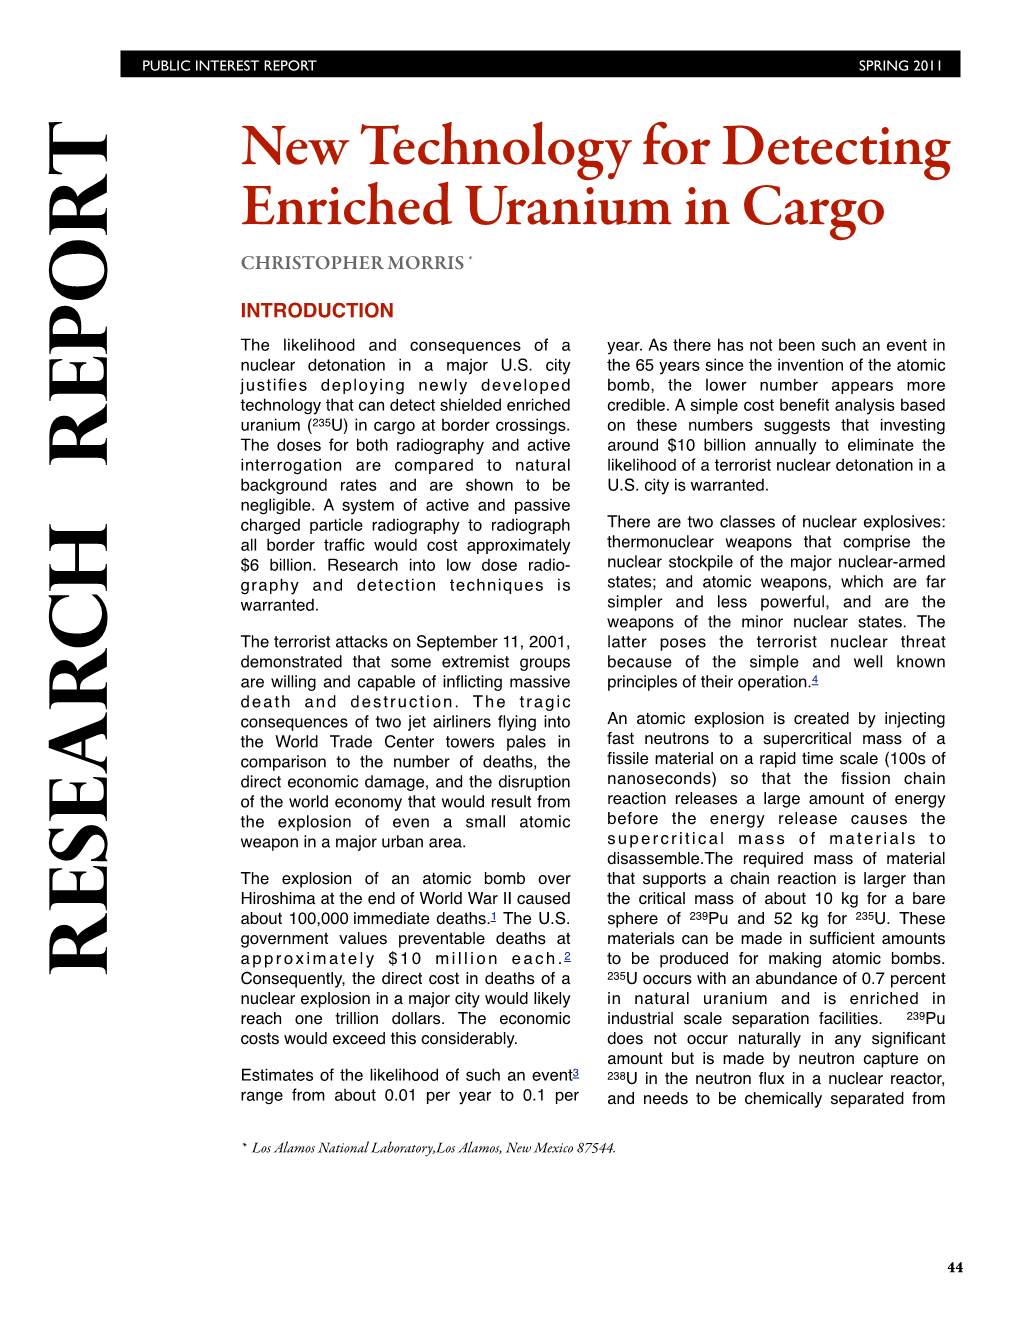 New Technology for Detecting Enriched Uranium in Cargo CHRISTOPHER MORRIS *